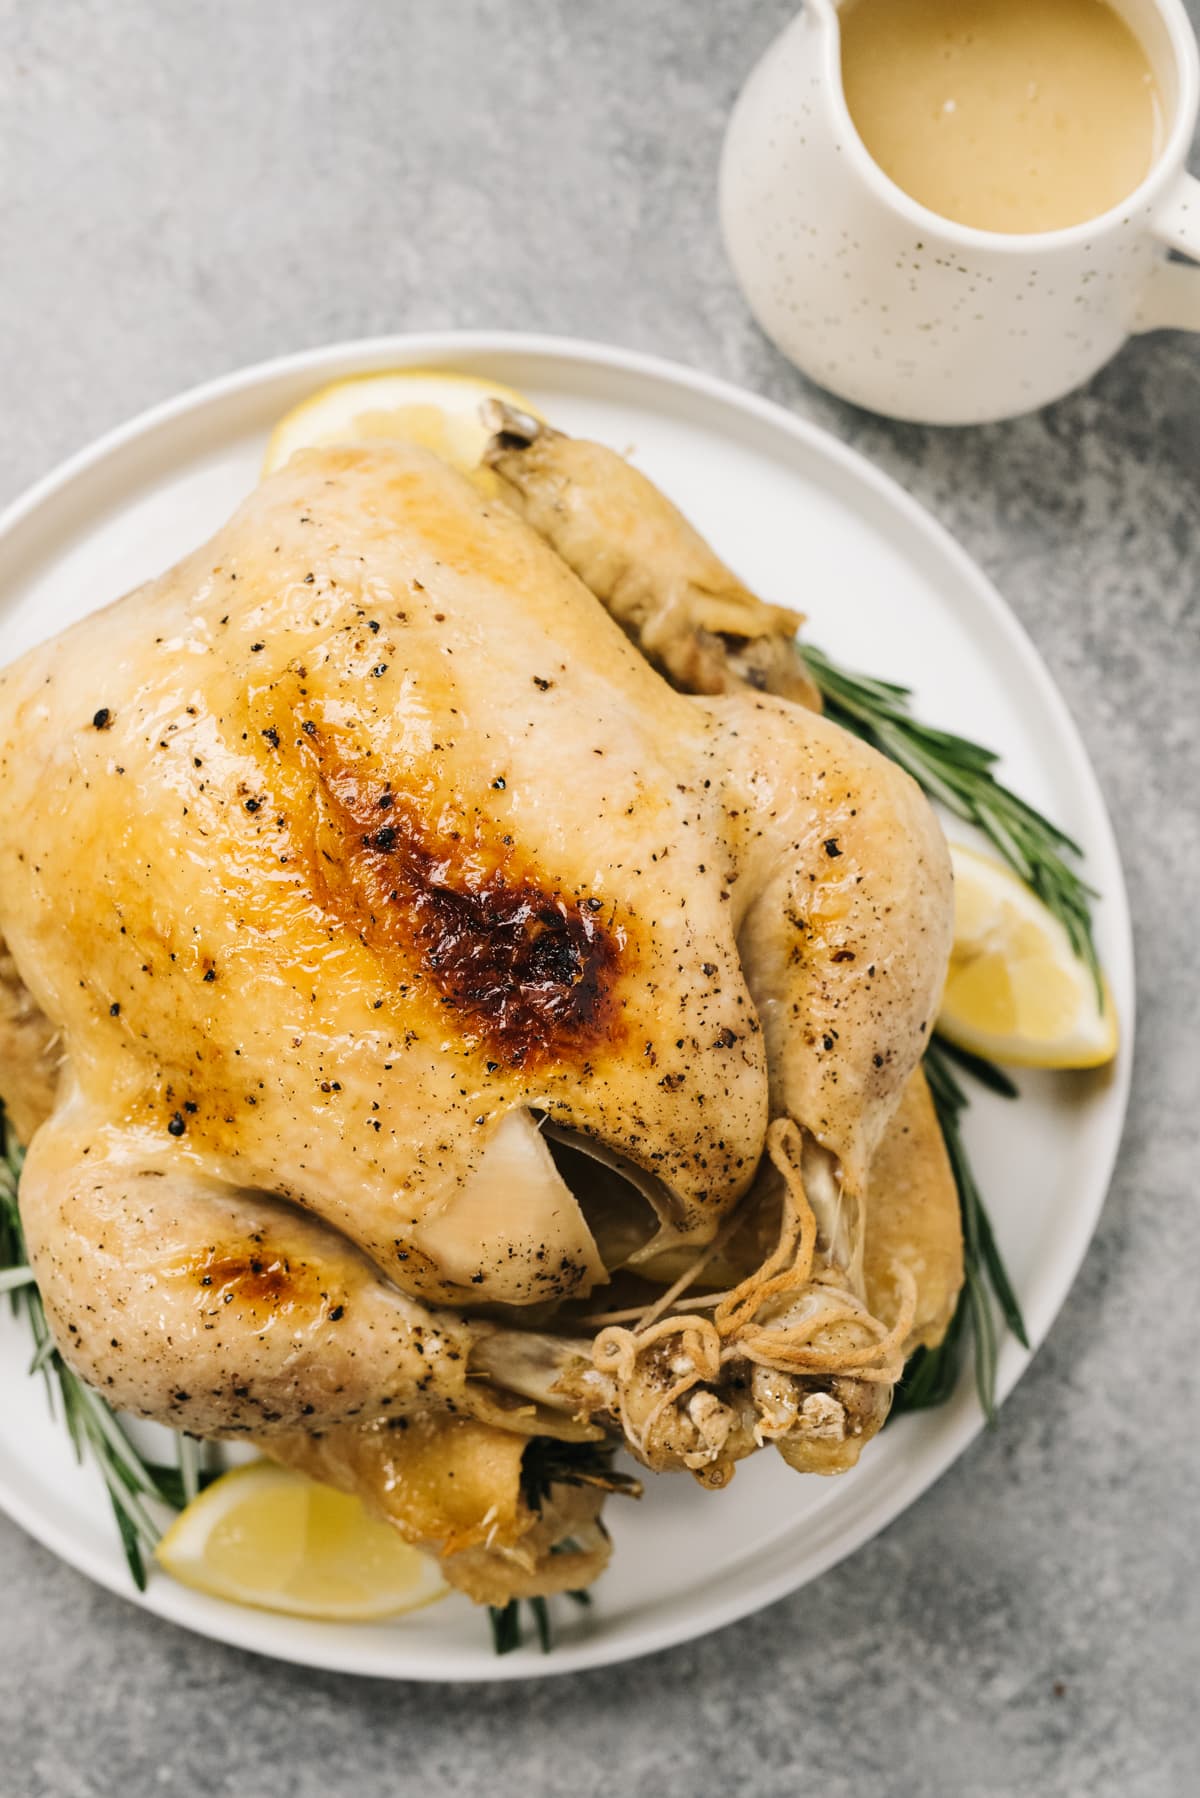 A whole chicken cooked in the instant pot on a white platter with a small pitcher of gravy on the side.